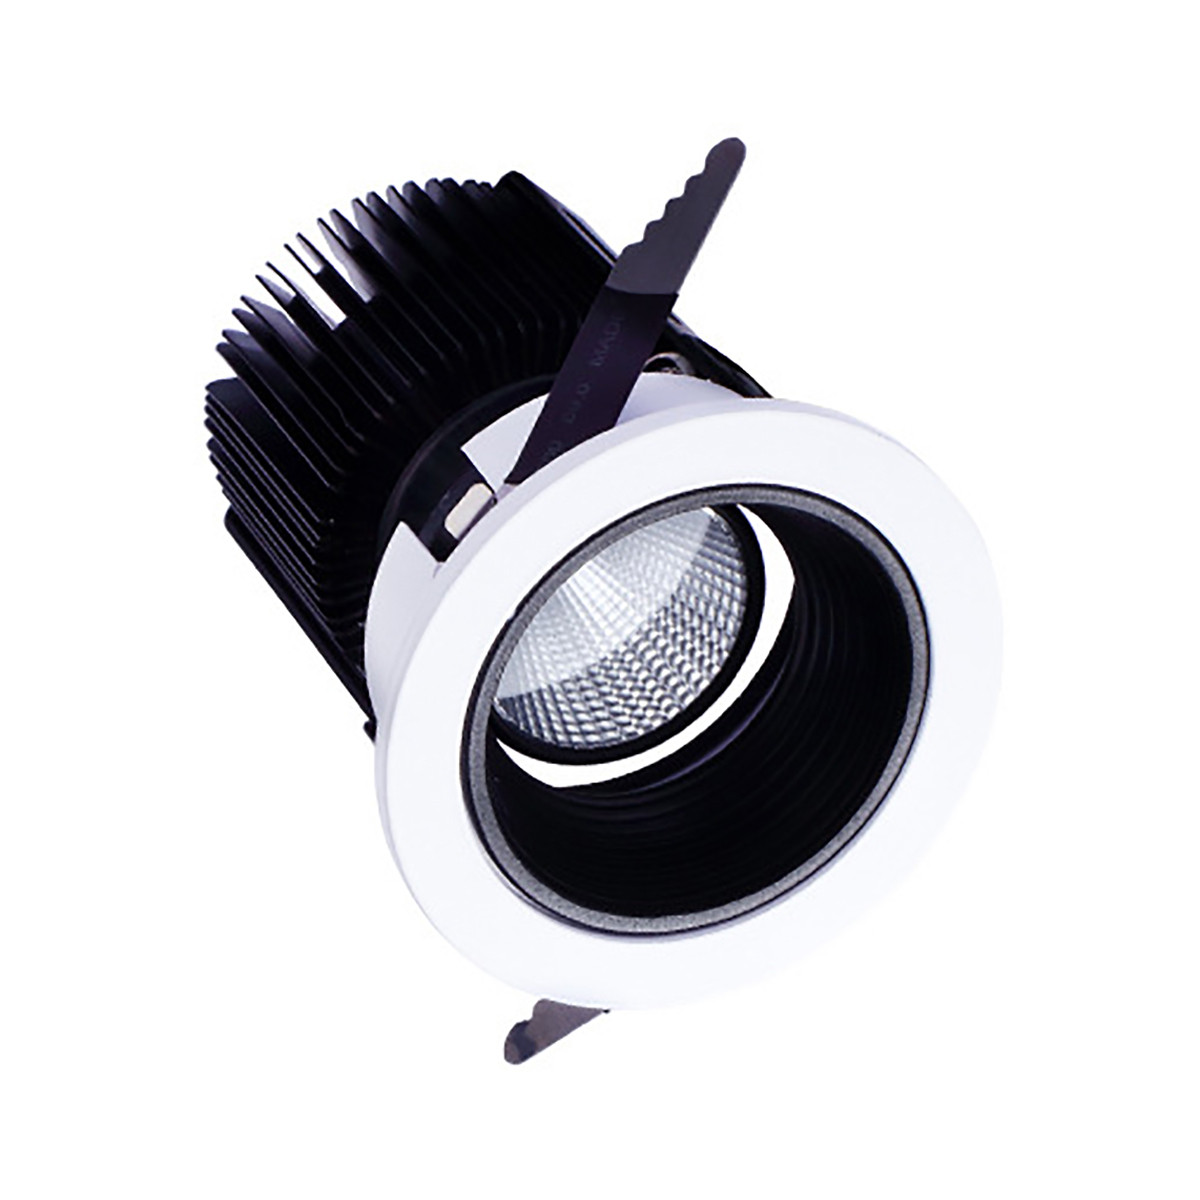 15W   2.95Inch  CutoutФ75mm Adjustable Recessed Roof Mounting LED Downlights Mate Black  Inner reflector